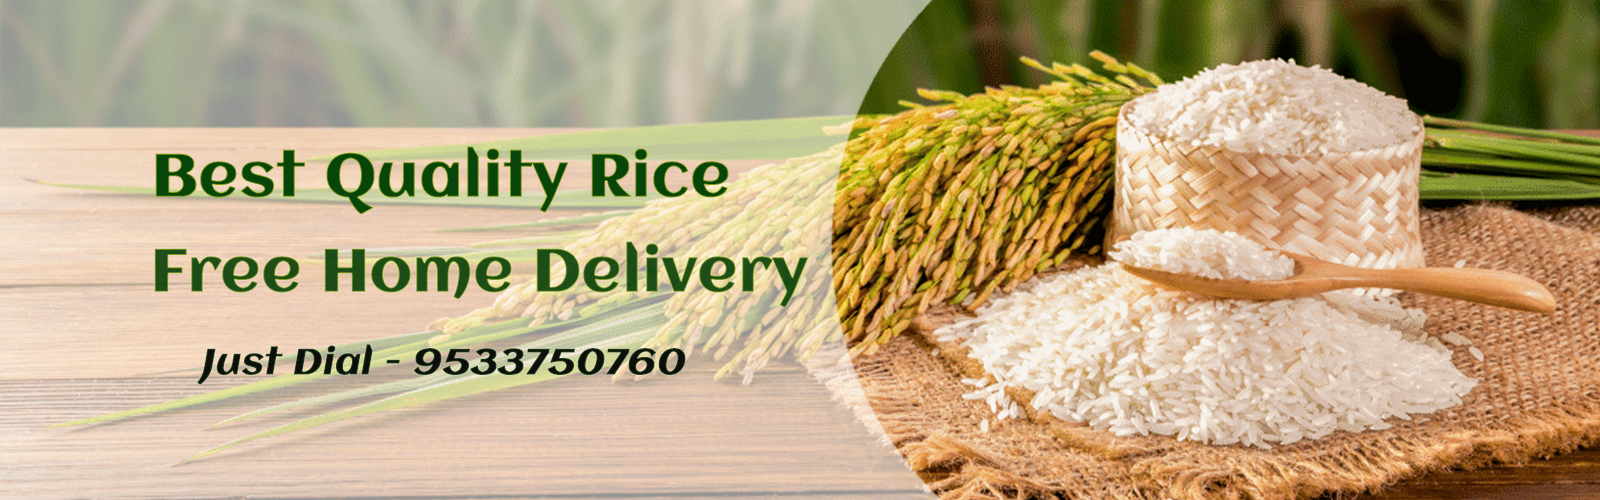 Hassle Free delivery of Rice Bag to Home. Finest grown rice from paddy fields of South India.